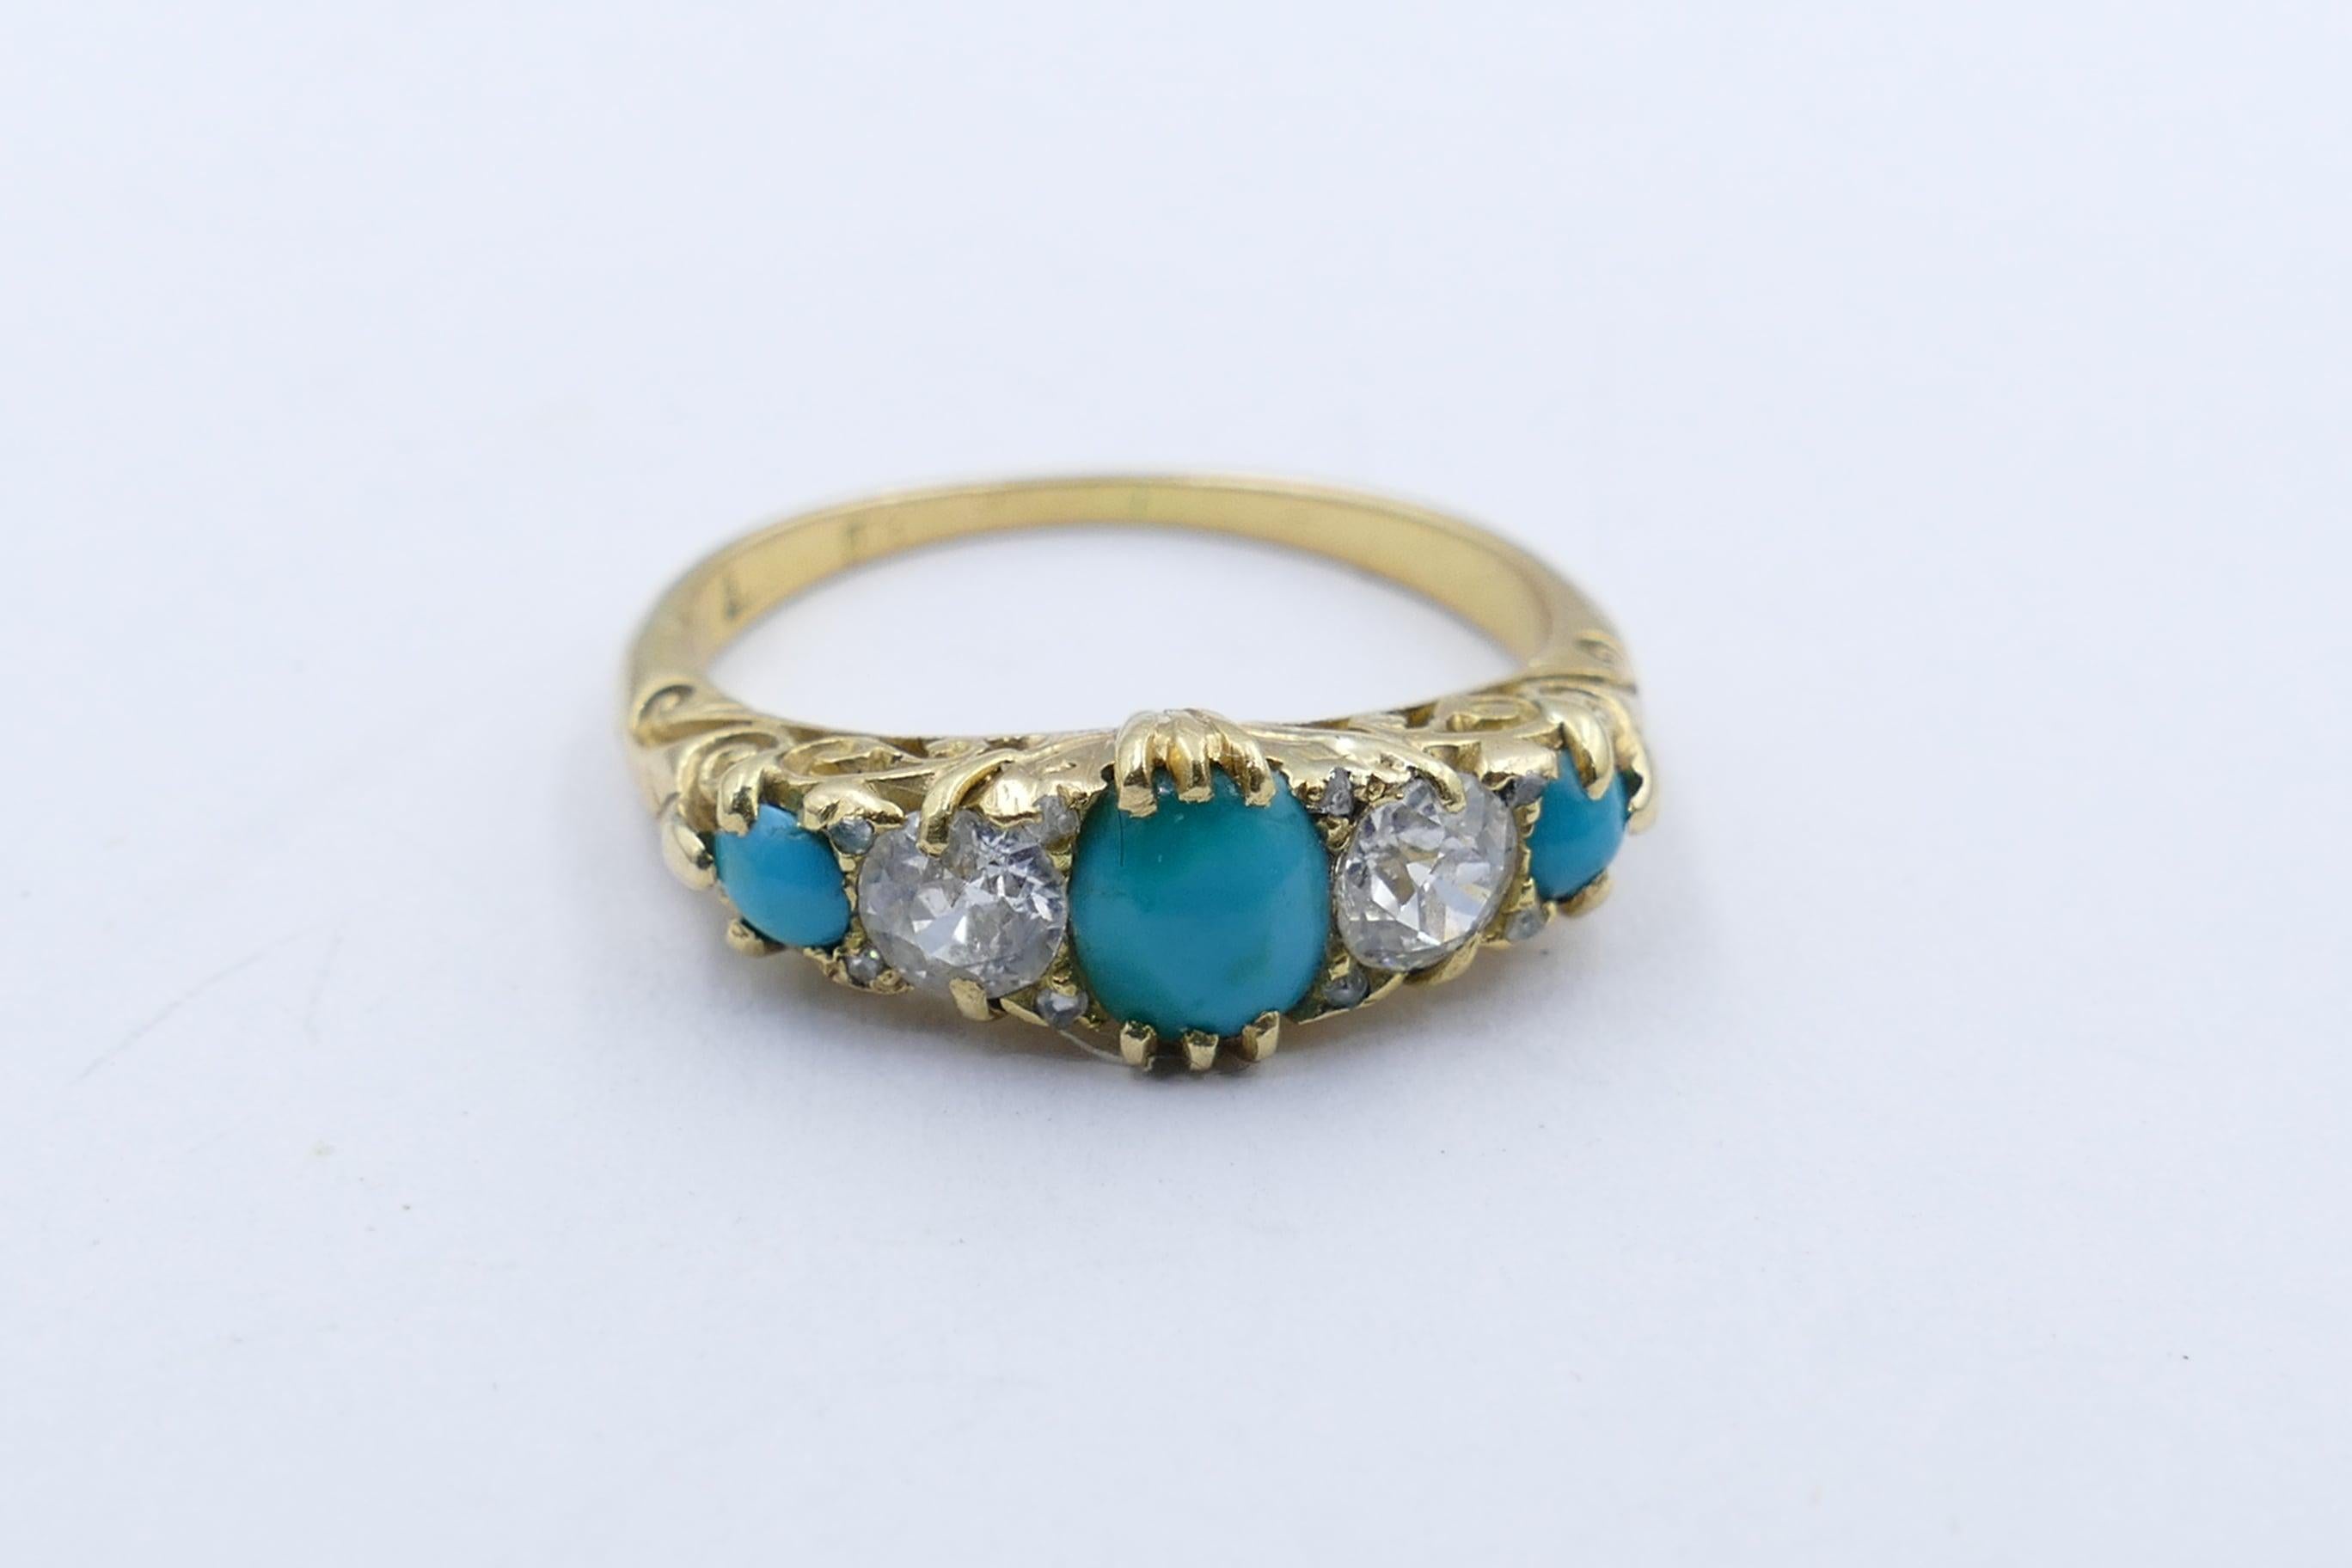 This lovely old Victorian/Edwardian Ring is comprised of 3 good mid-blue Turquoise stones with the addition of 2 old cut Diamonds & 4 smaller rose cut Diamonds. 
One Turquoise measures 6.0 X 4.5mm with the remaining 2 measuring 2.5mm.
The 2 Diamonds